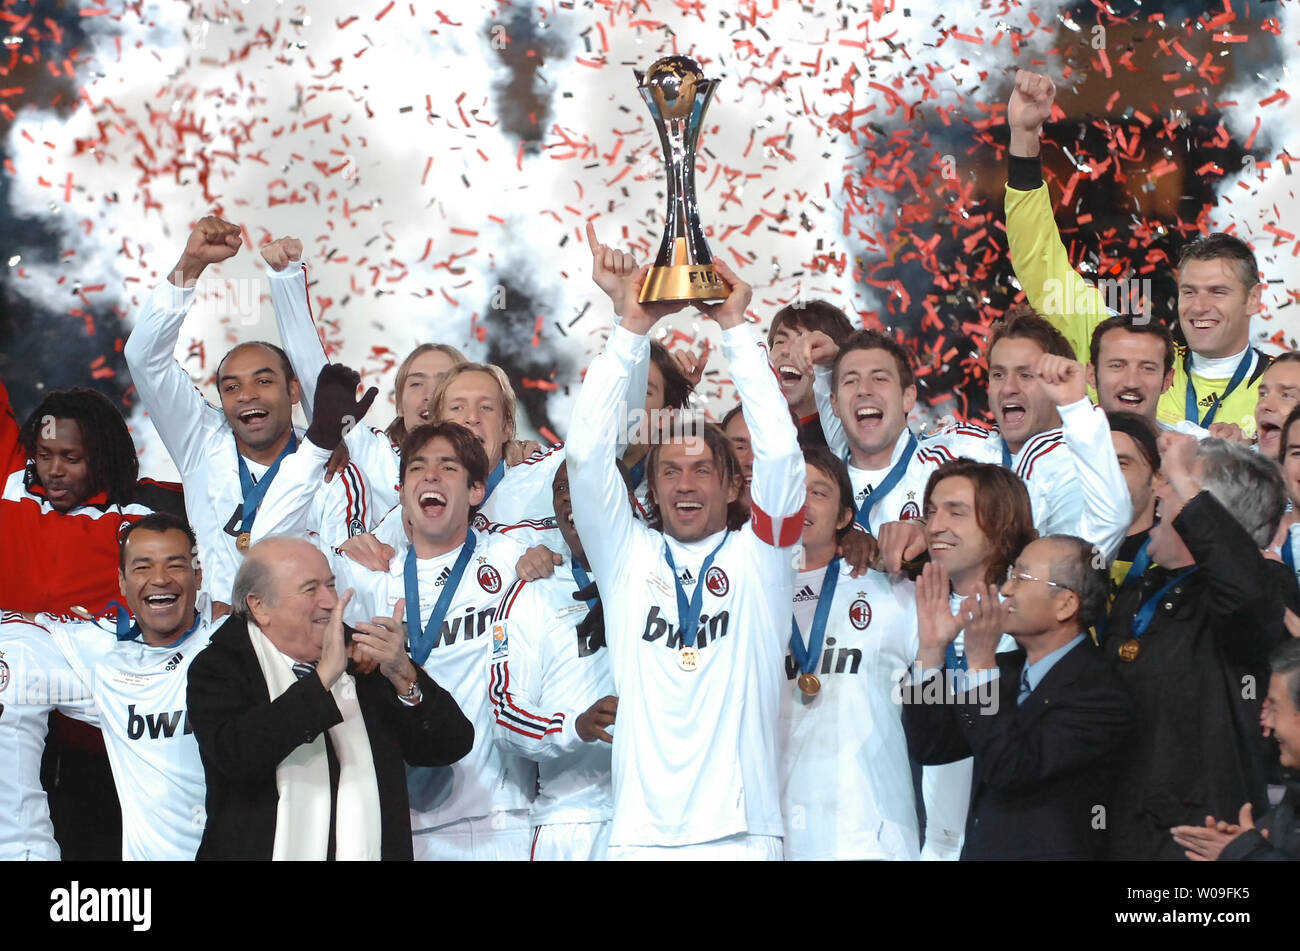 Paolo Maldini (C), of AC Milan, holds the champion trophy after winning the FIFA Club Worldcup 2007 at the Nissan Stadium in Yokohama, Japan, on December 16 2007. AC Milan defeated Boca Juniors 4-2. (UPI Photo/Keizo Mori) Stock Photo